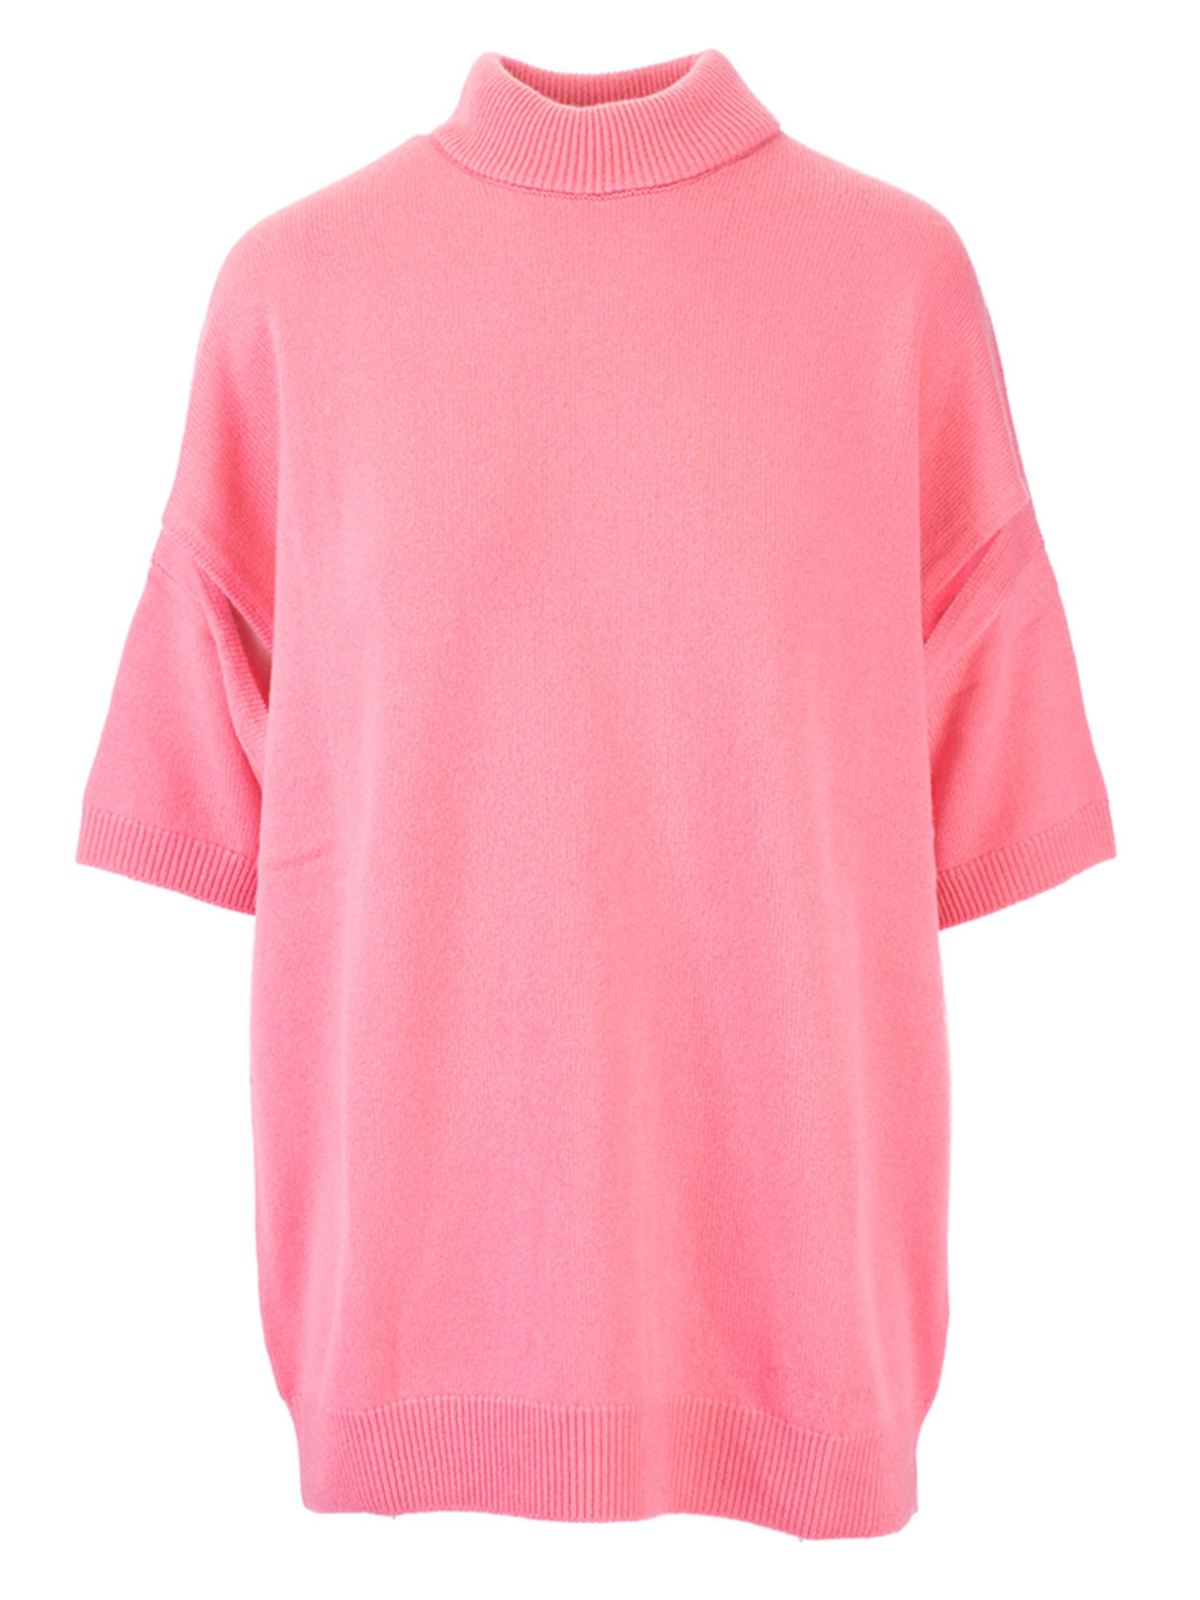 GIVENCHY OVERSIZED CASHMERE T-SHIRT IN PINK